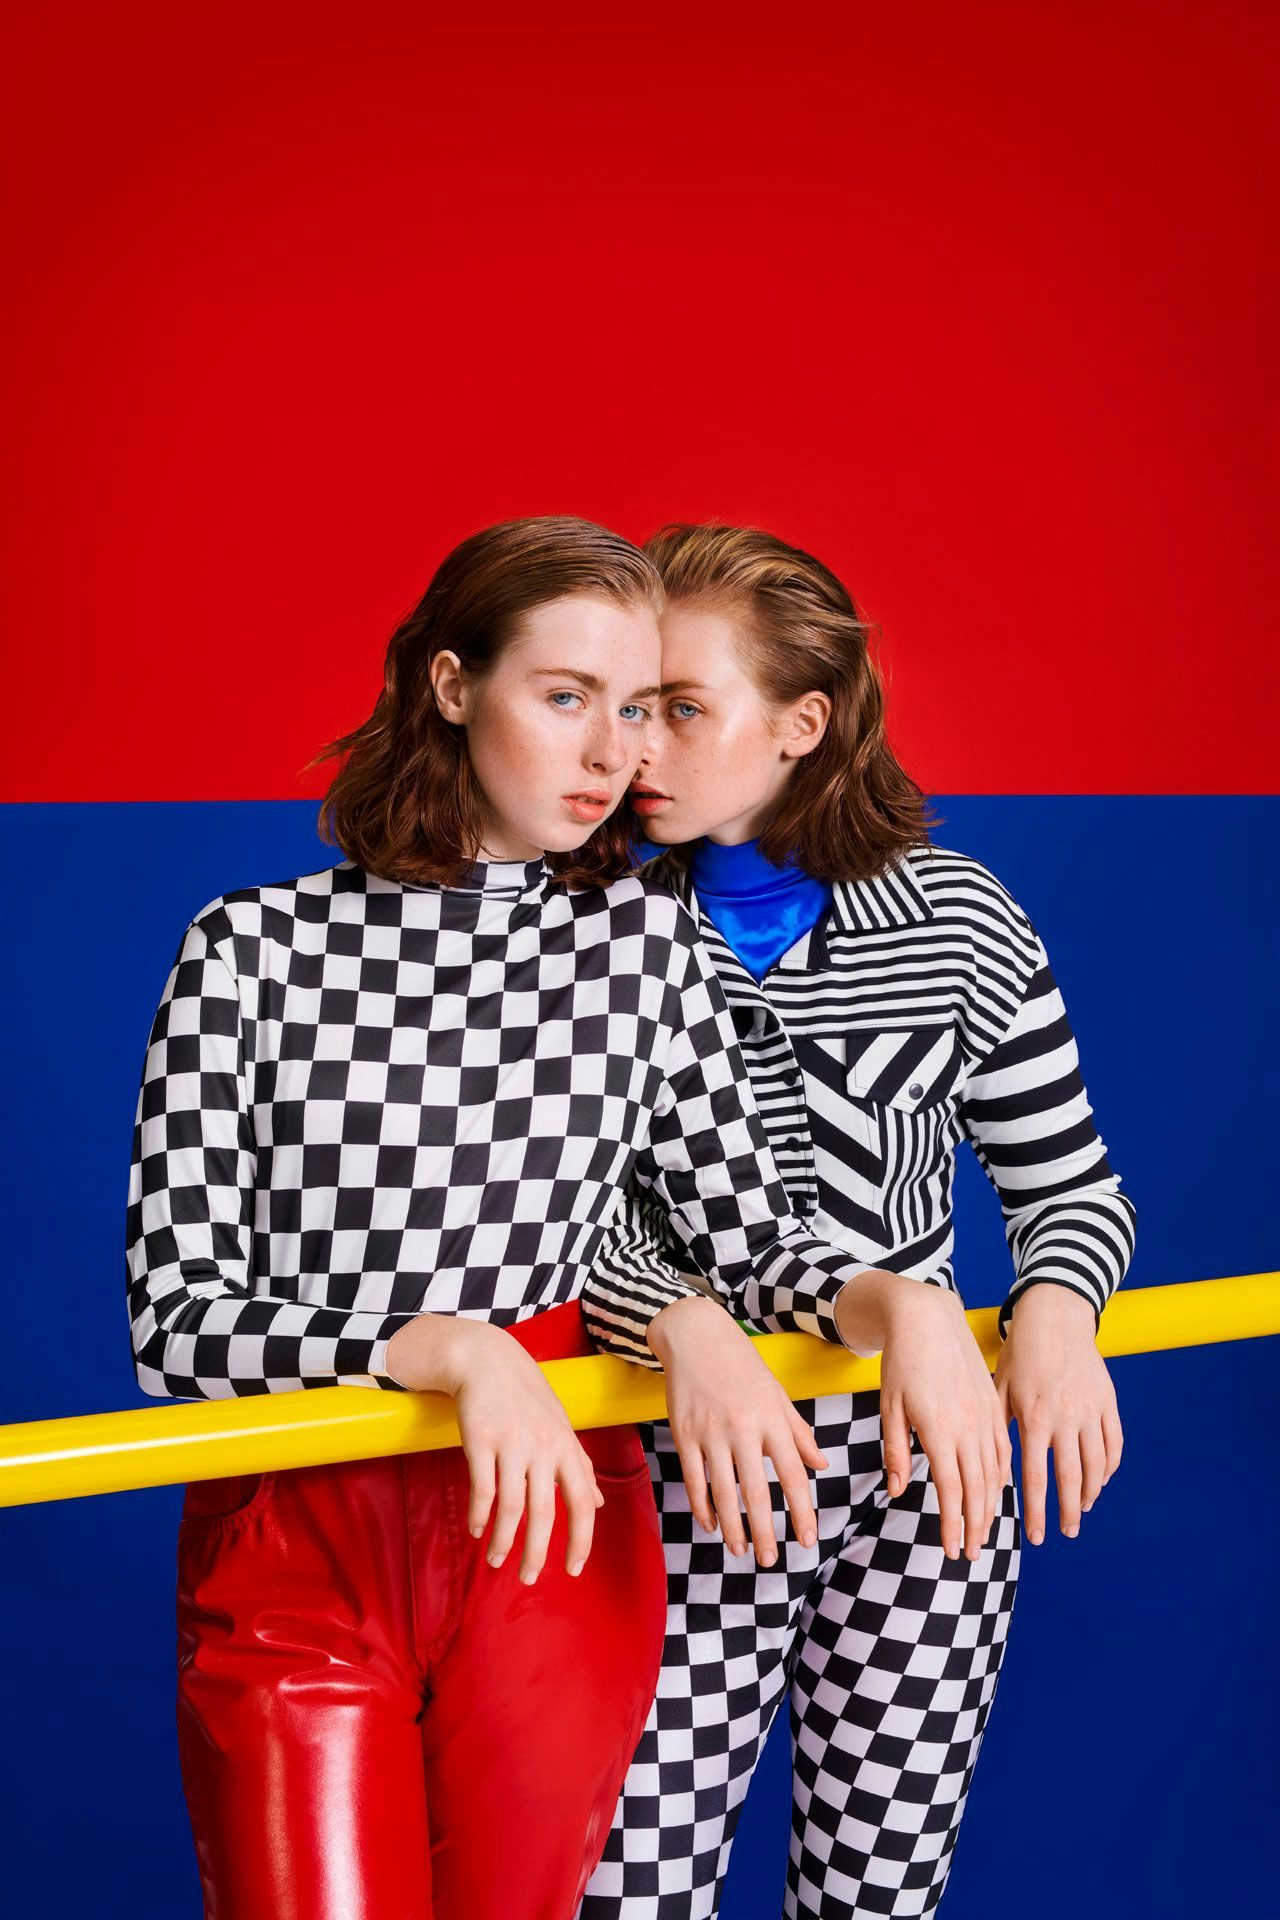 Two identical twins in checkered outfits against a red and blue background, one in a contemplative pose and the other with a whispering gesture.